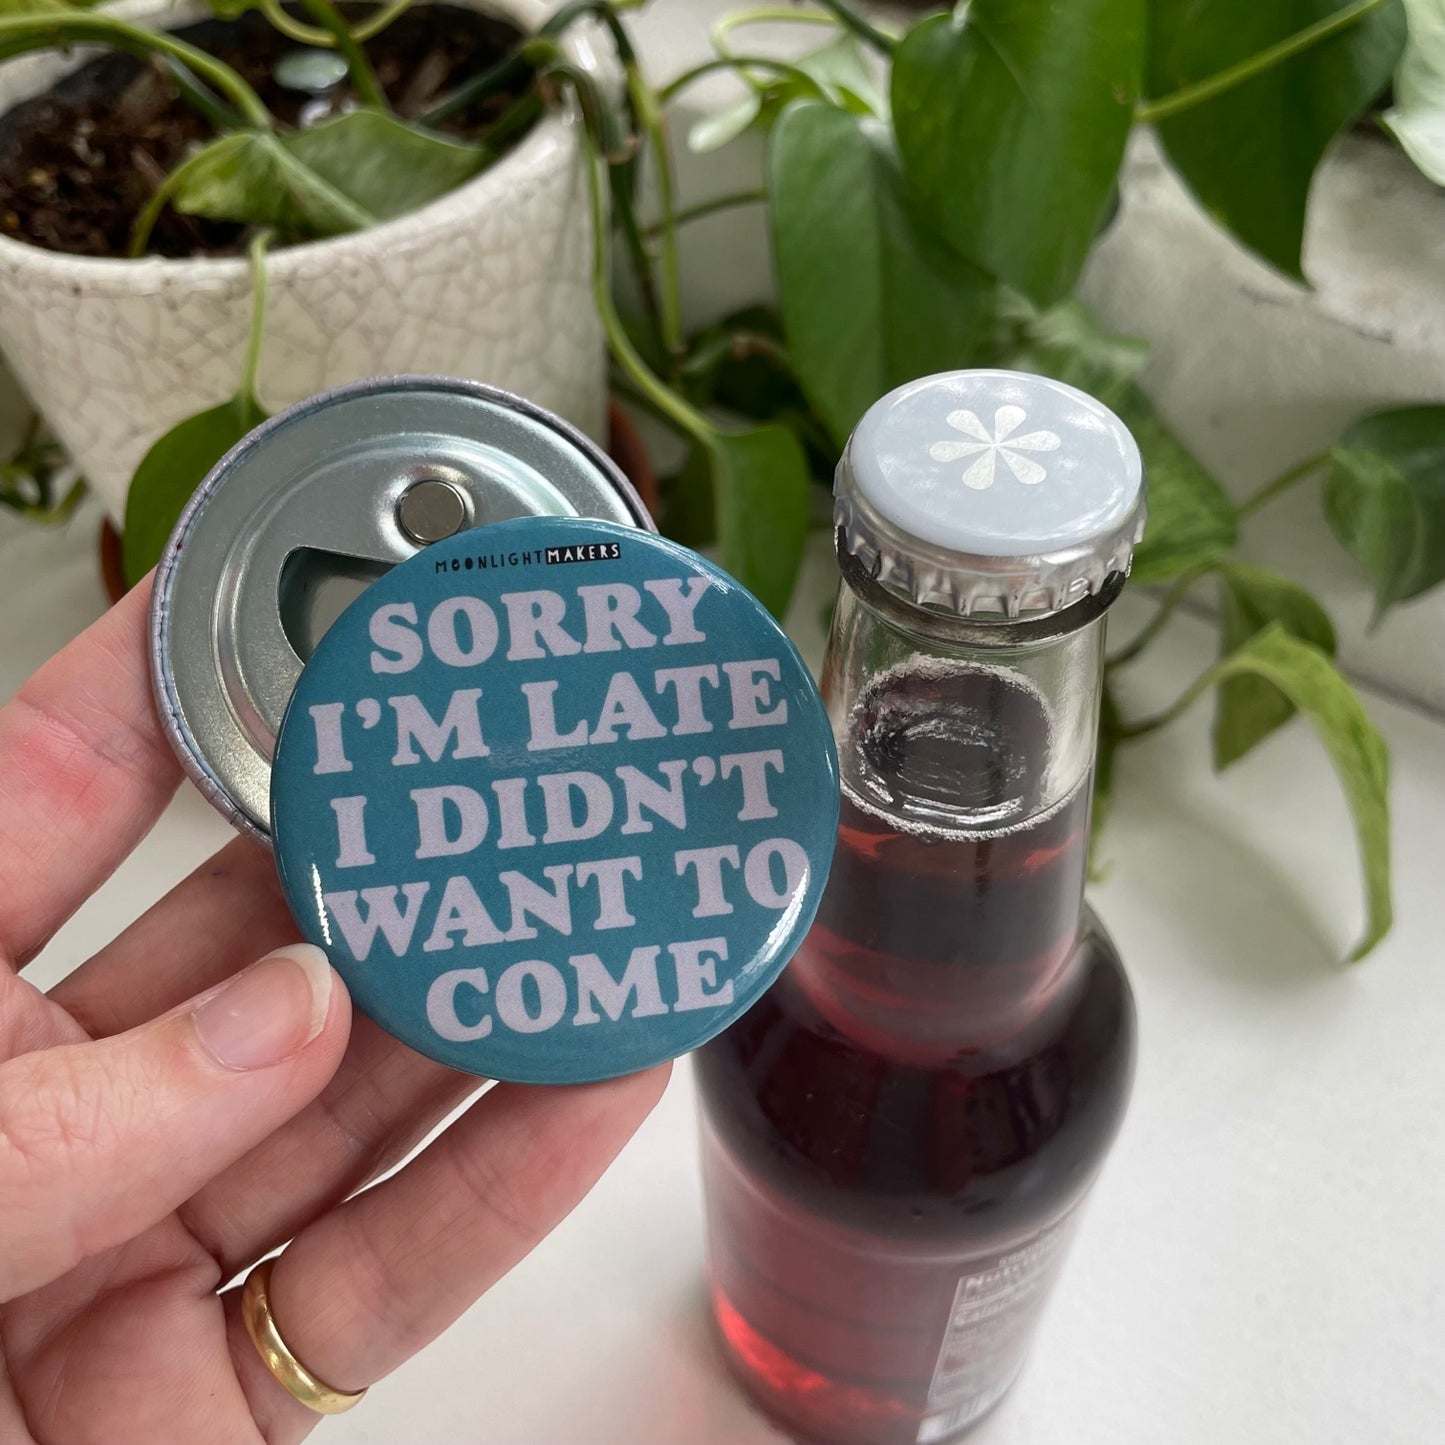 SALE - Sorry I'm Late I Didn't Want To Come - Bottle Opener - MoonlightMakers